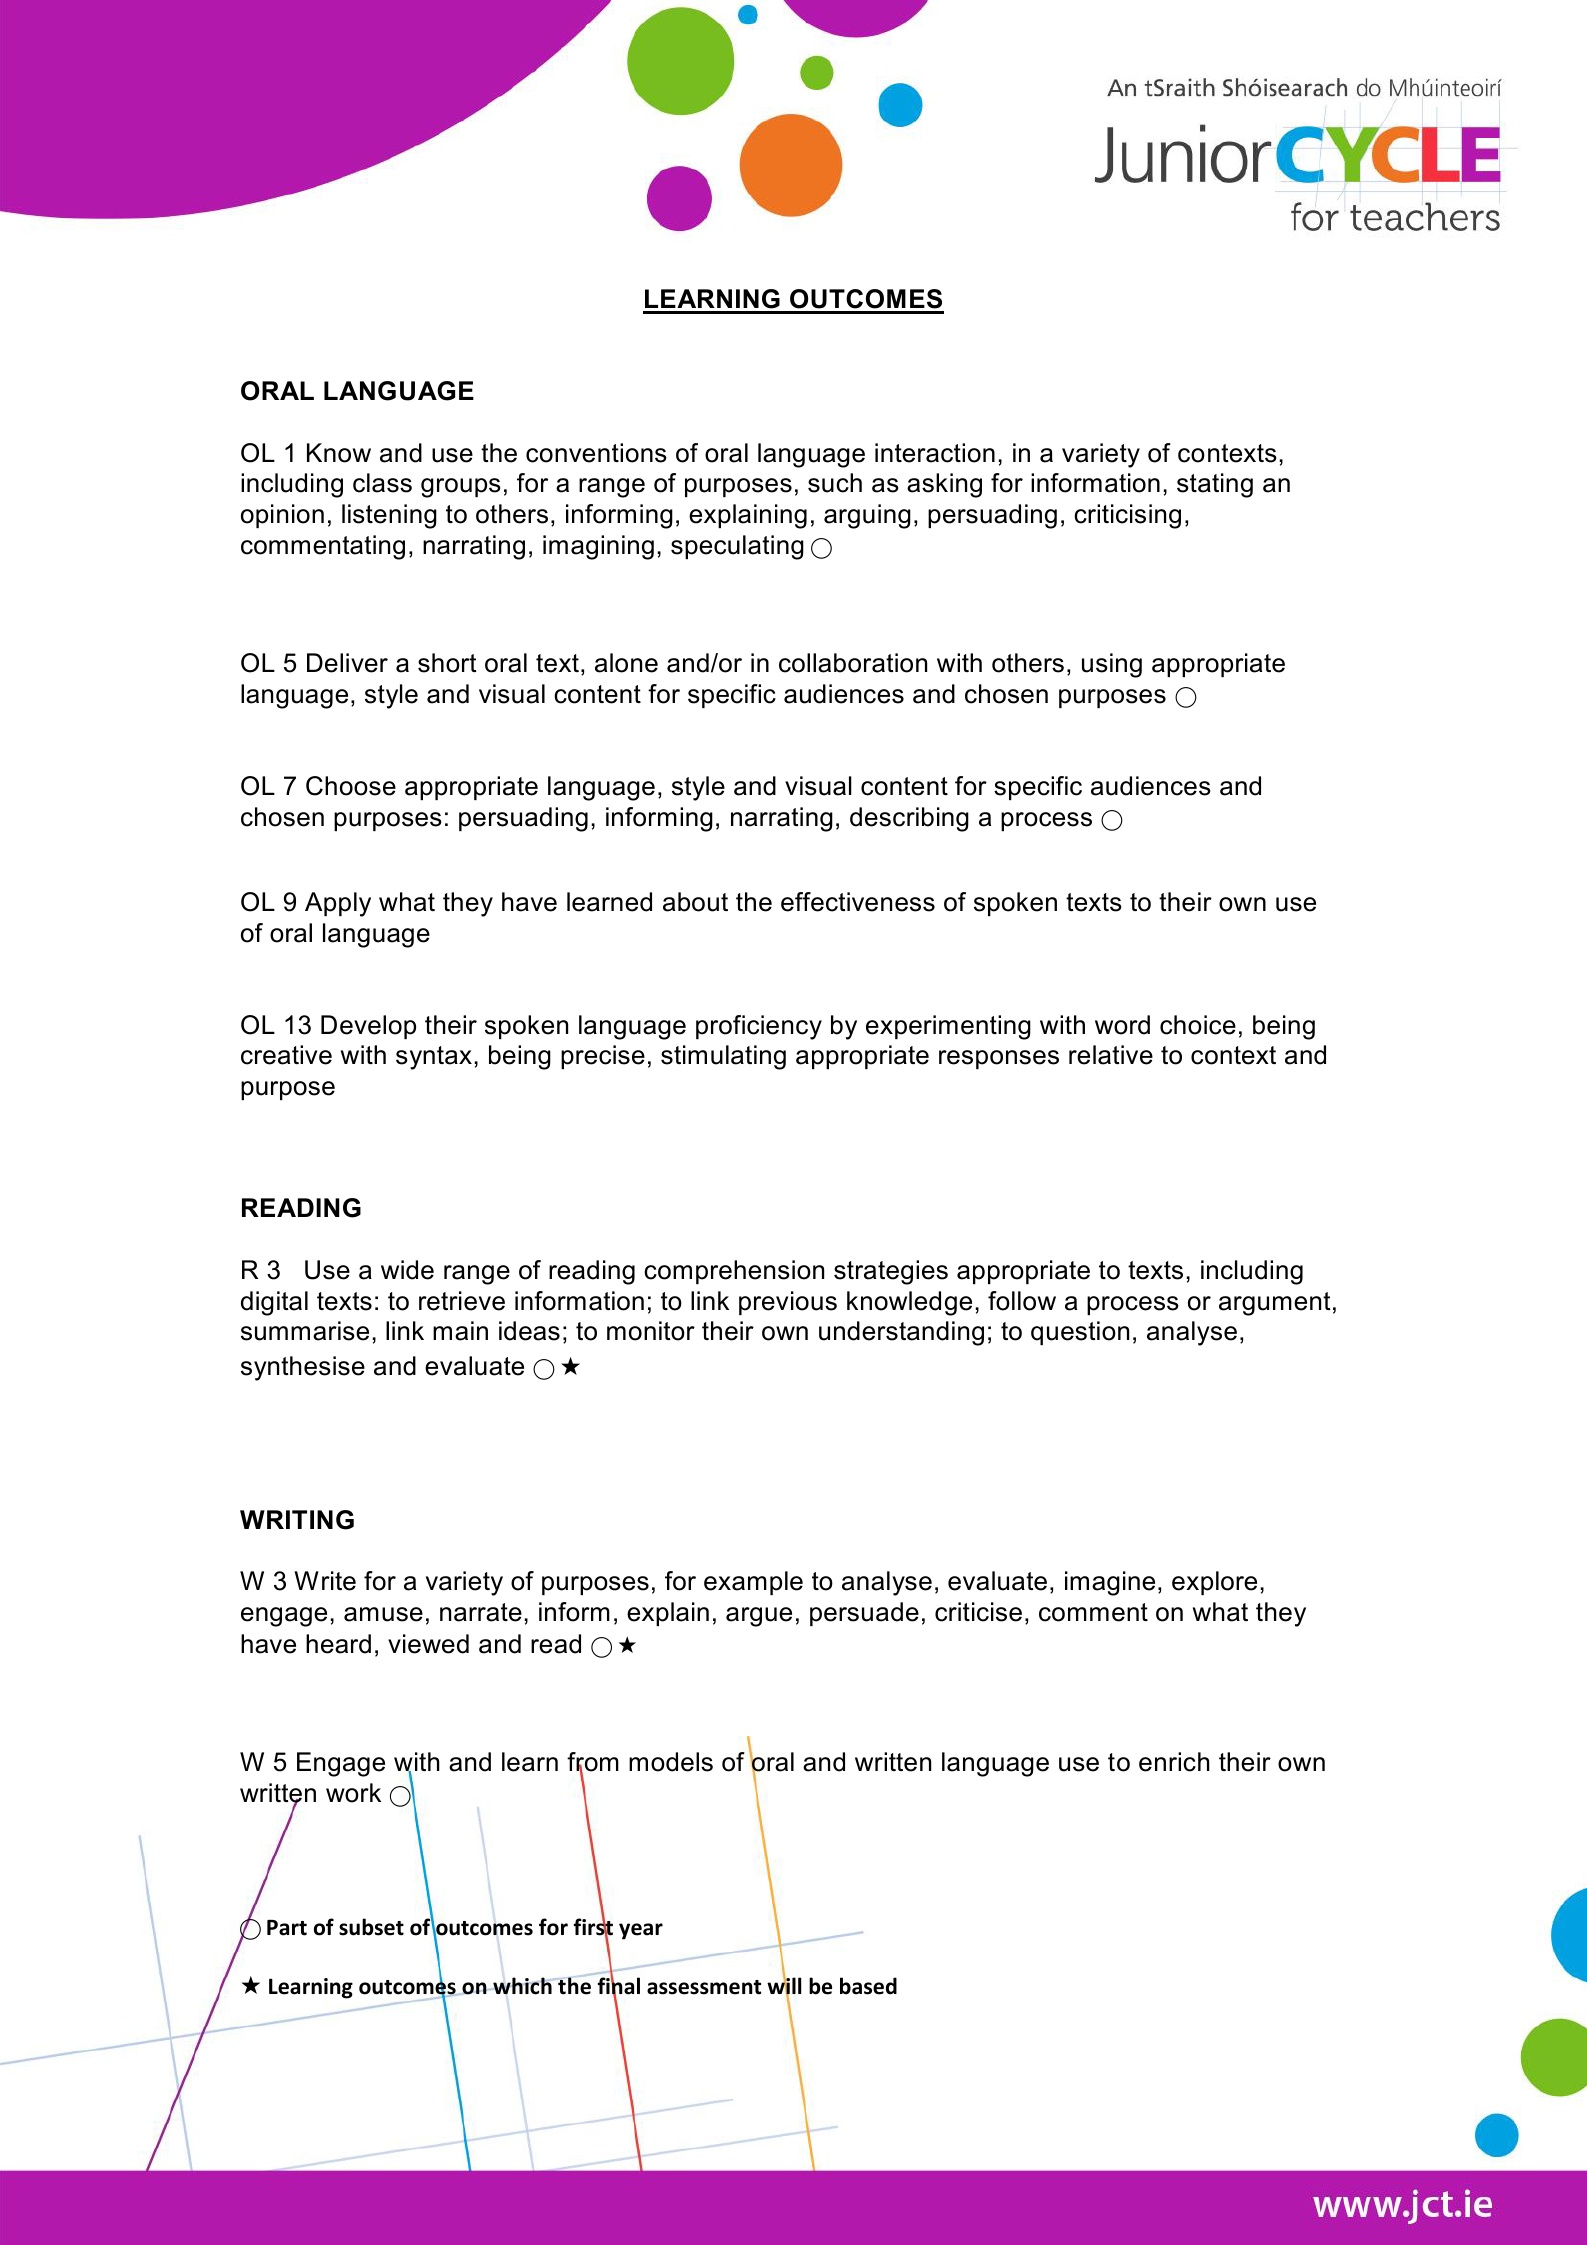 Handout 1: Learning Outcomes